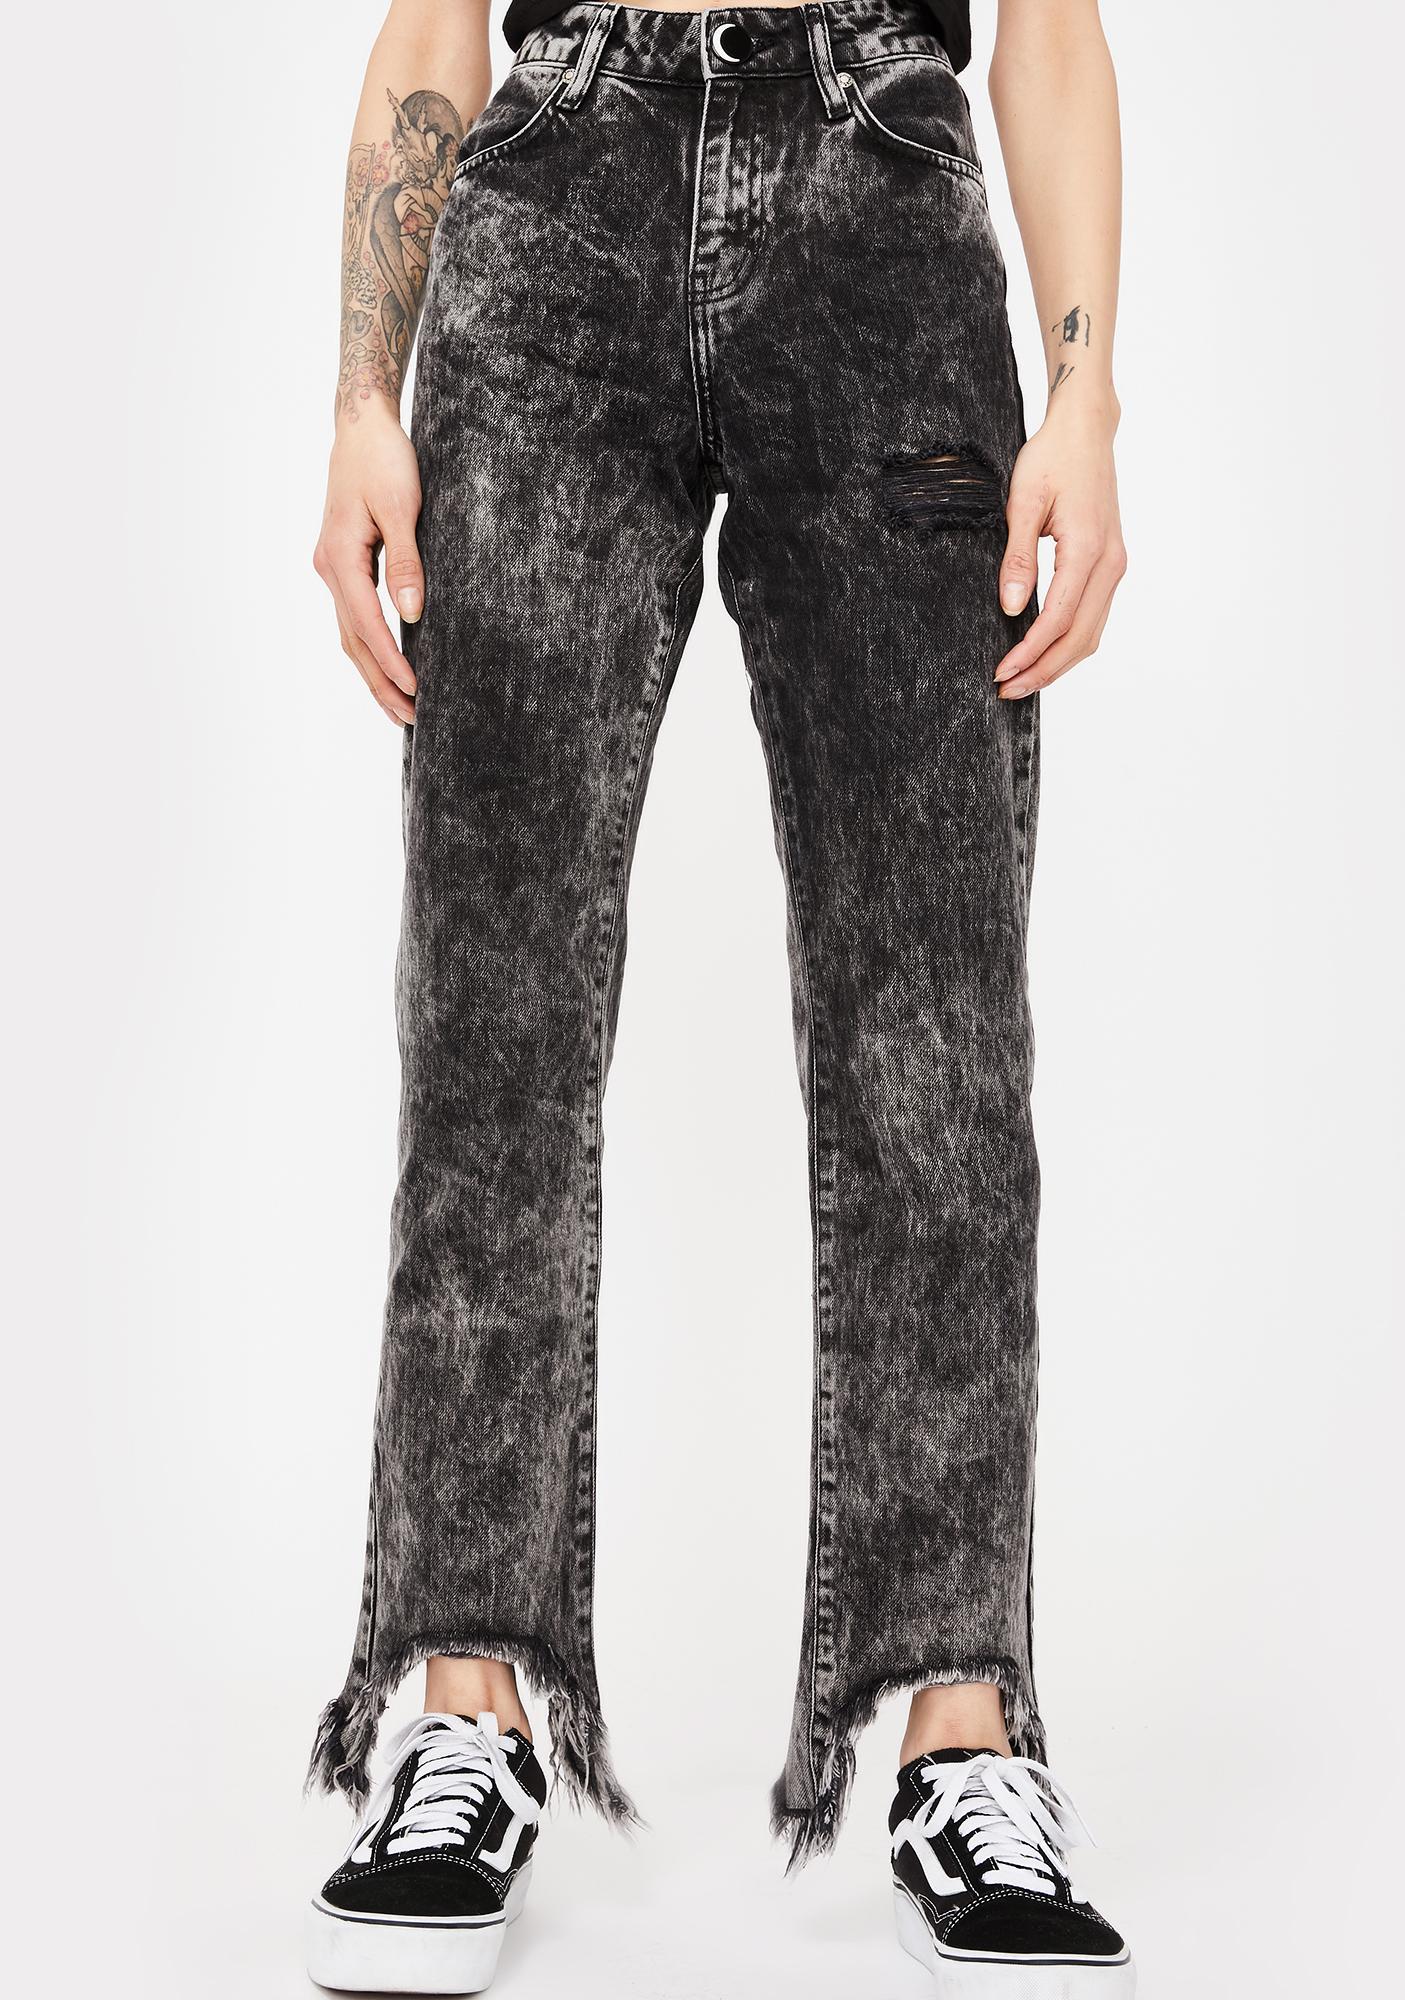 grey washed out jeans